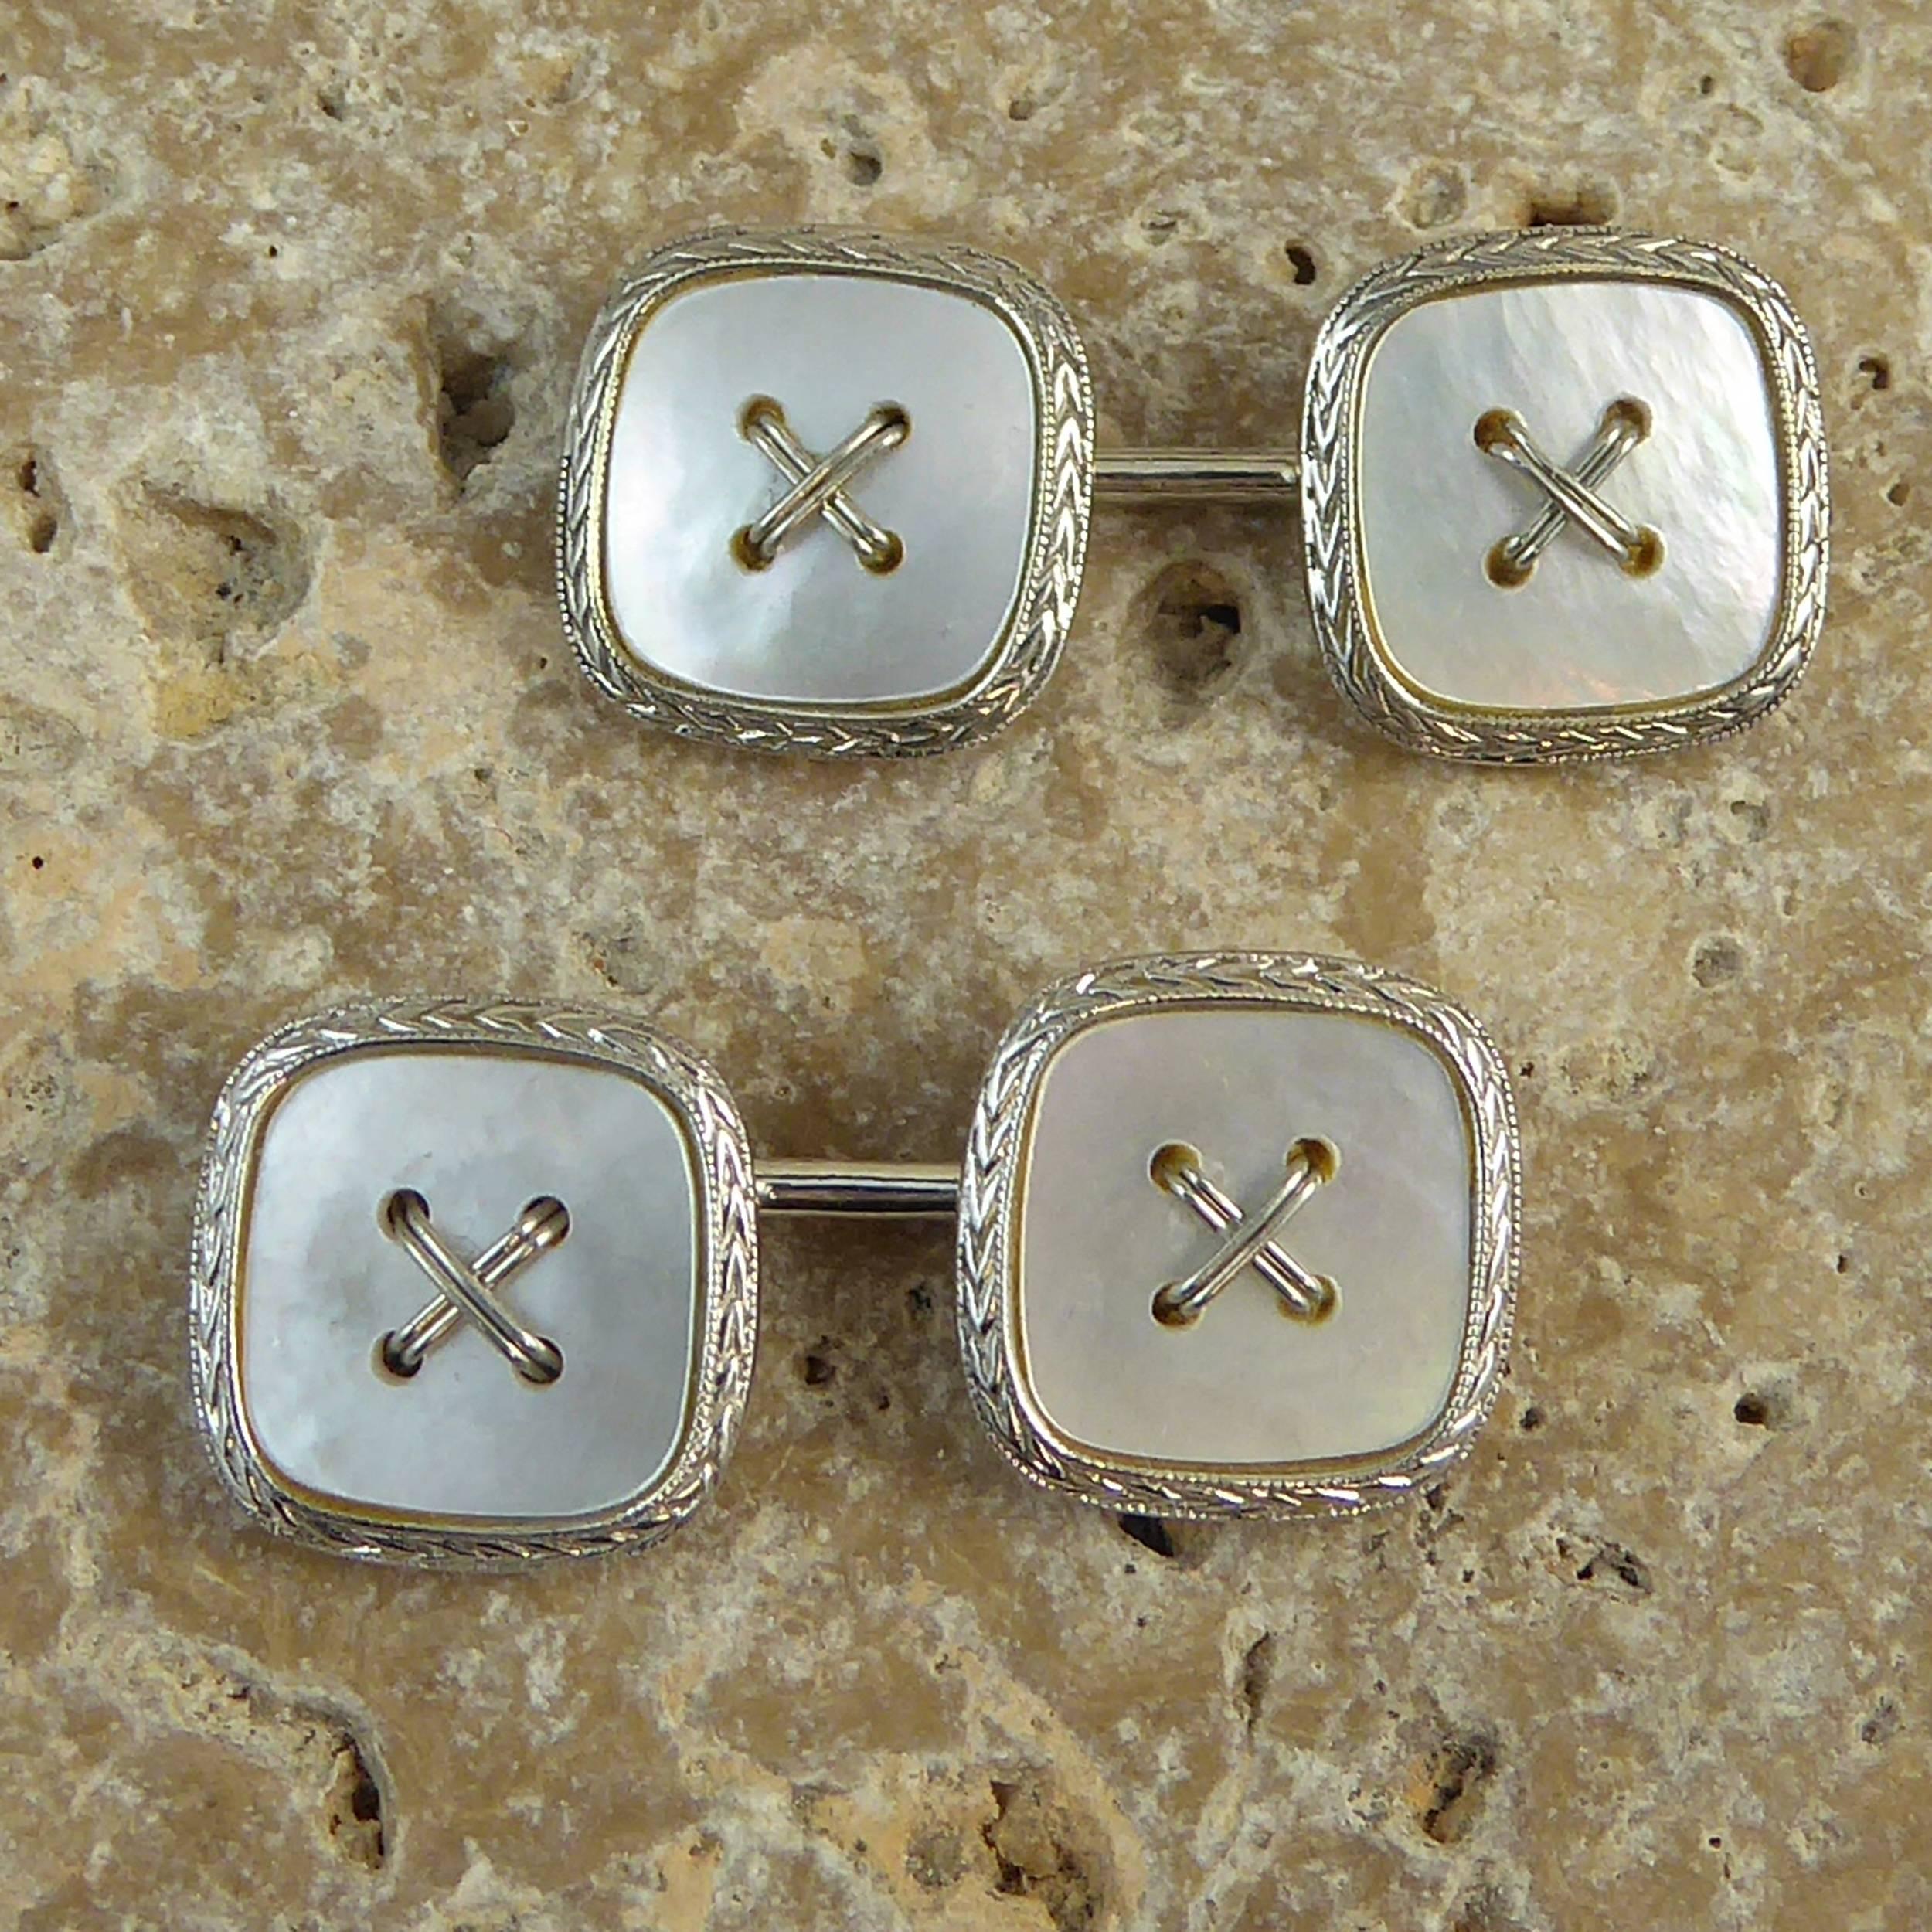 Vintage Art Deco Button Cufflinks, White Gold, Mother-of-Pearl 1